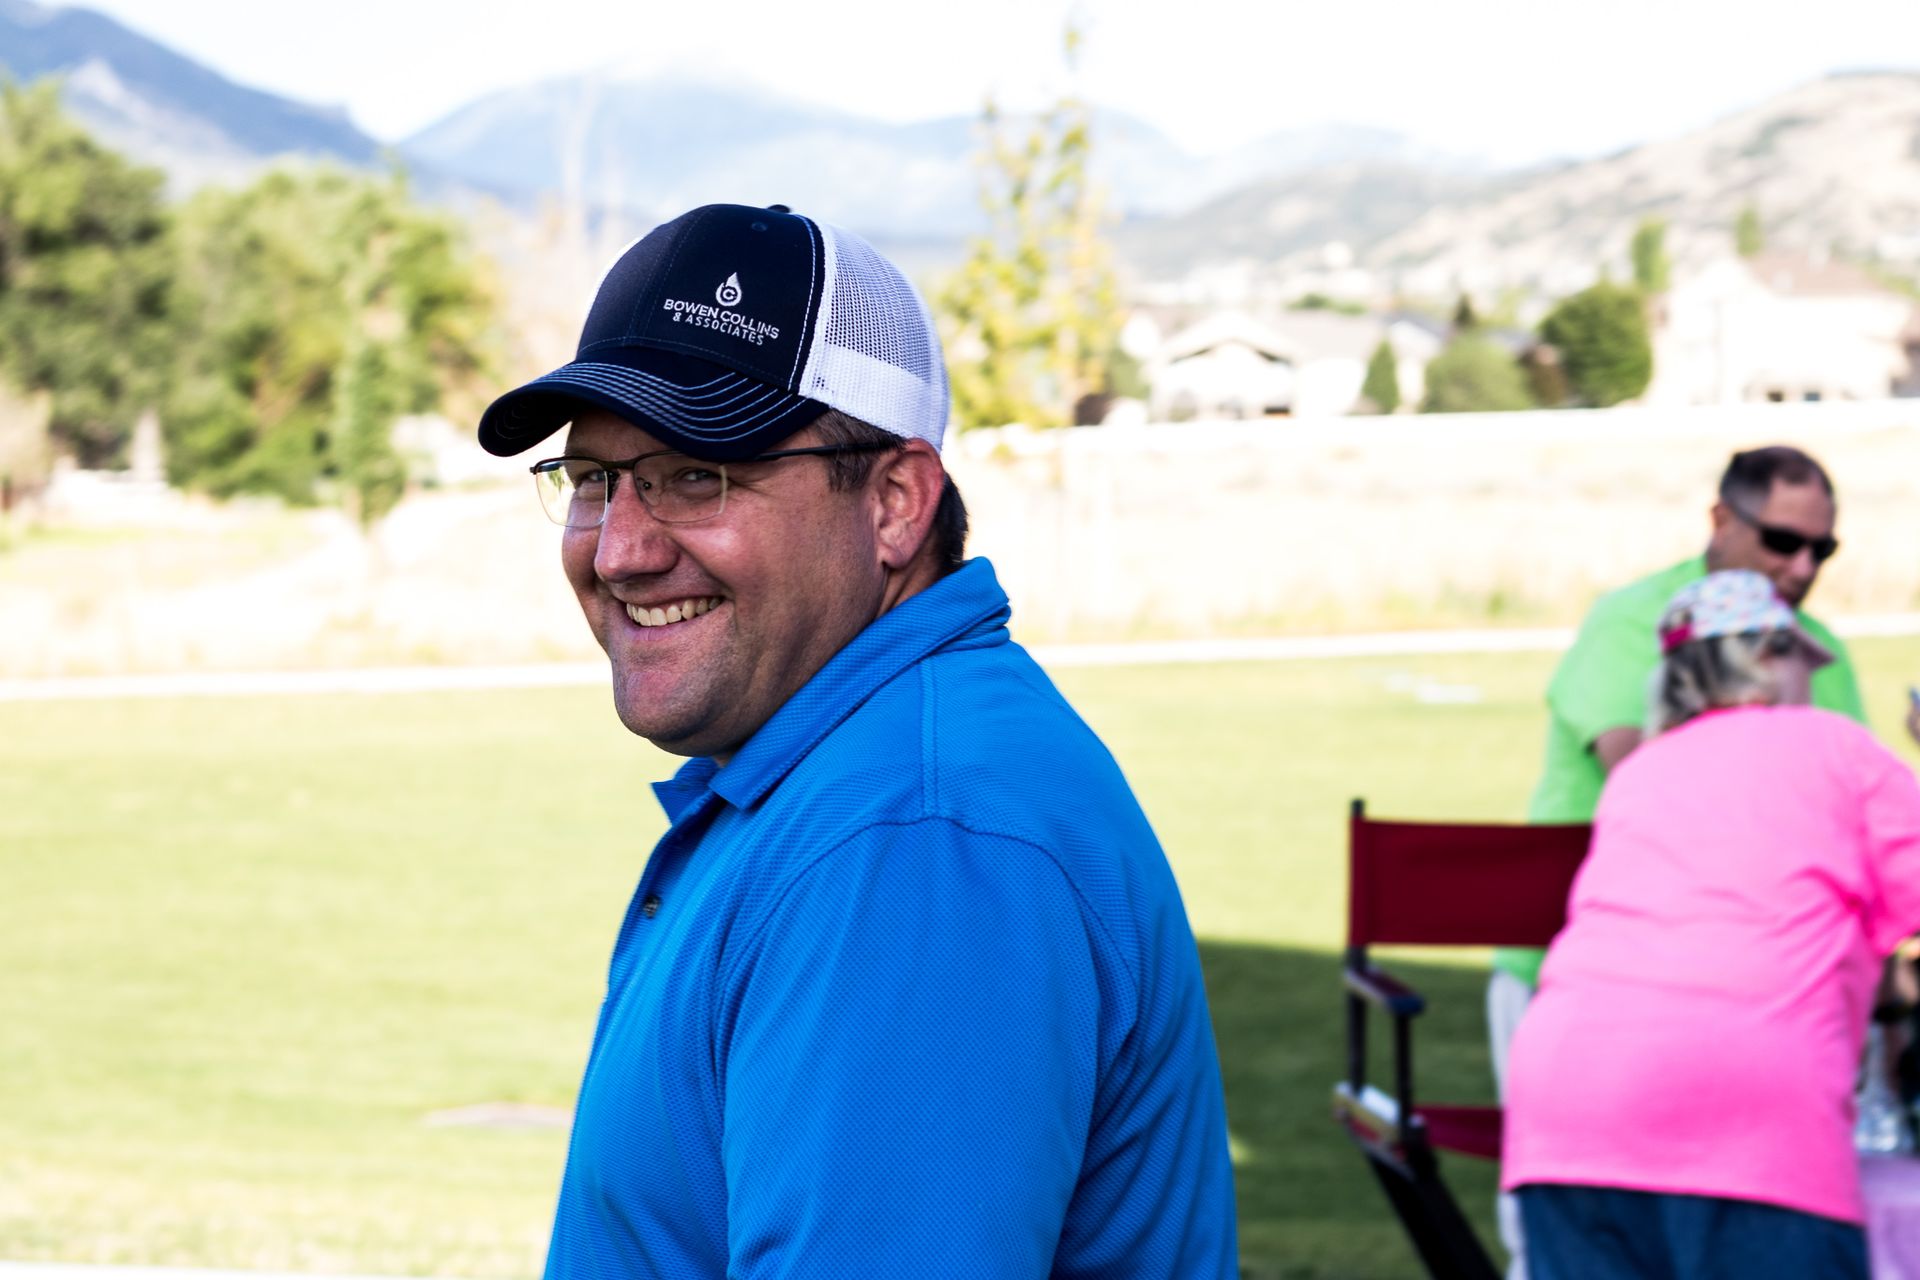 Man in blue polo shirt, baseball cap, and glasses smiling.